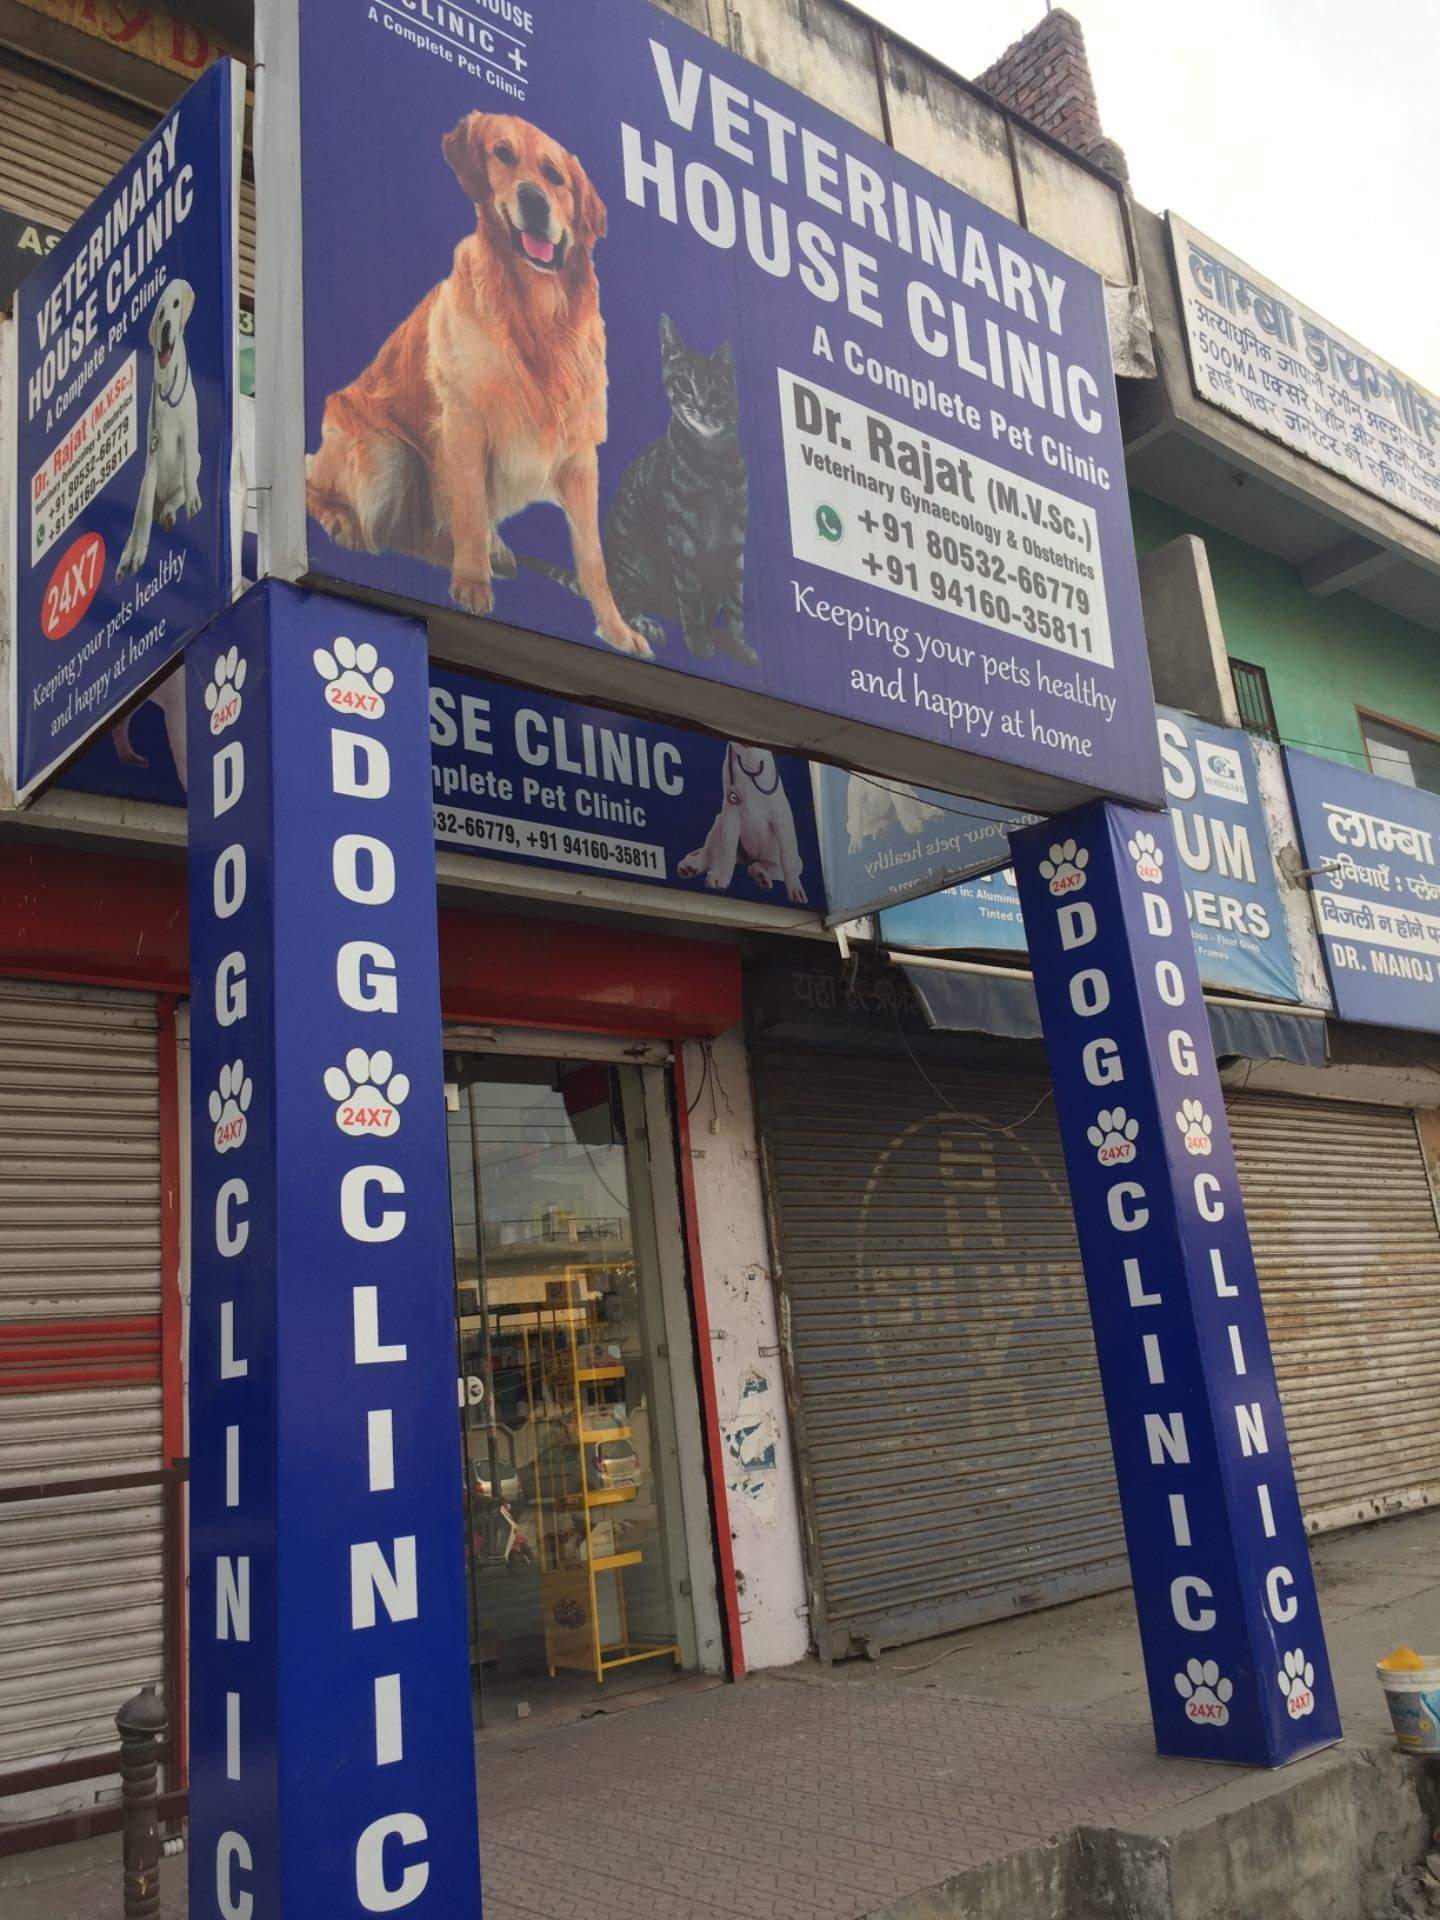 Veterinary House Clinic|Hospitals|Medical Services